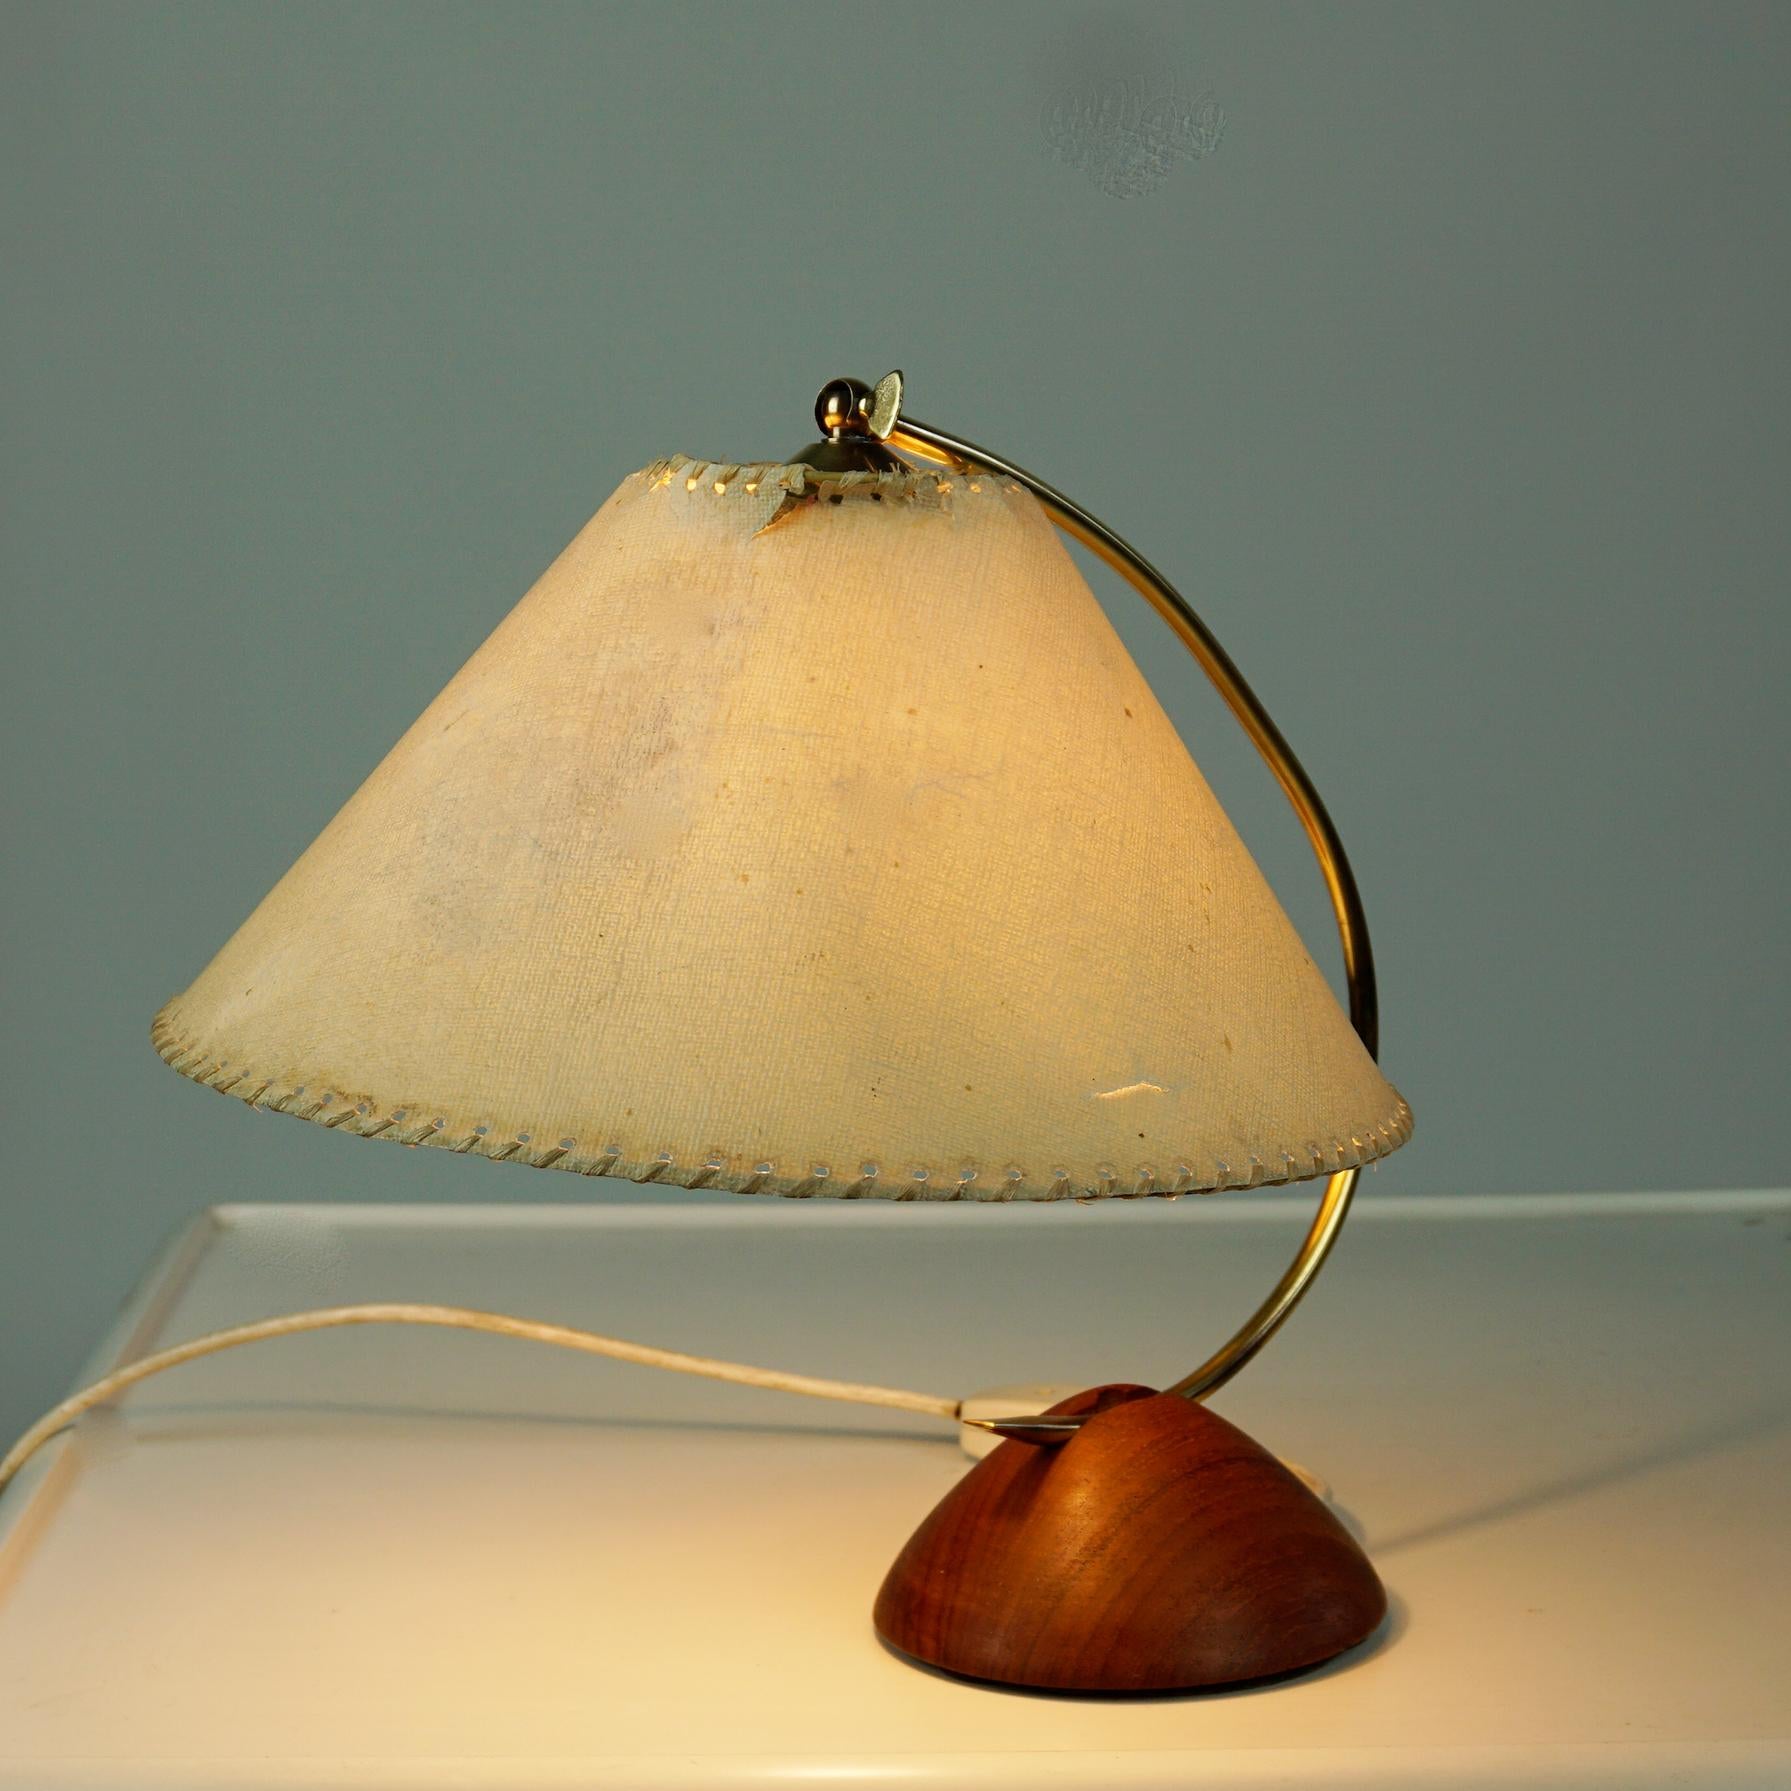 Turned Scandinavian Modern Teak and Brass Table Lamp with Original Paper Shade For Sale